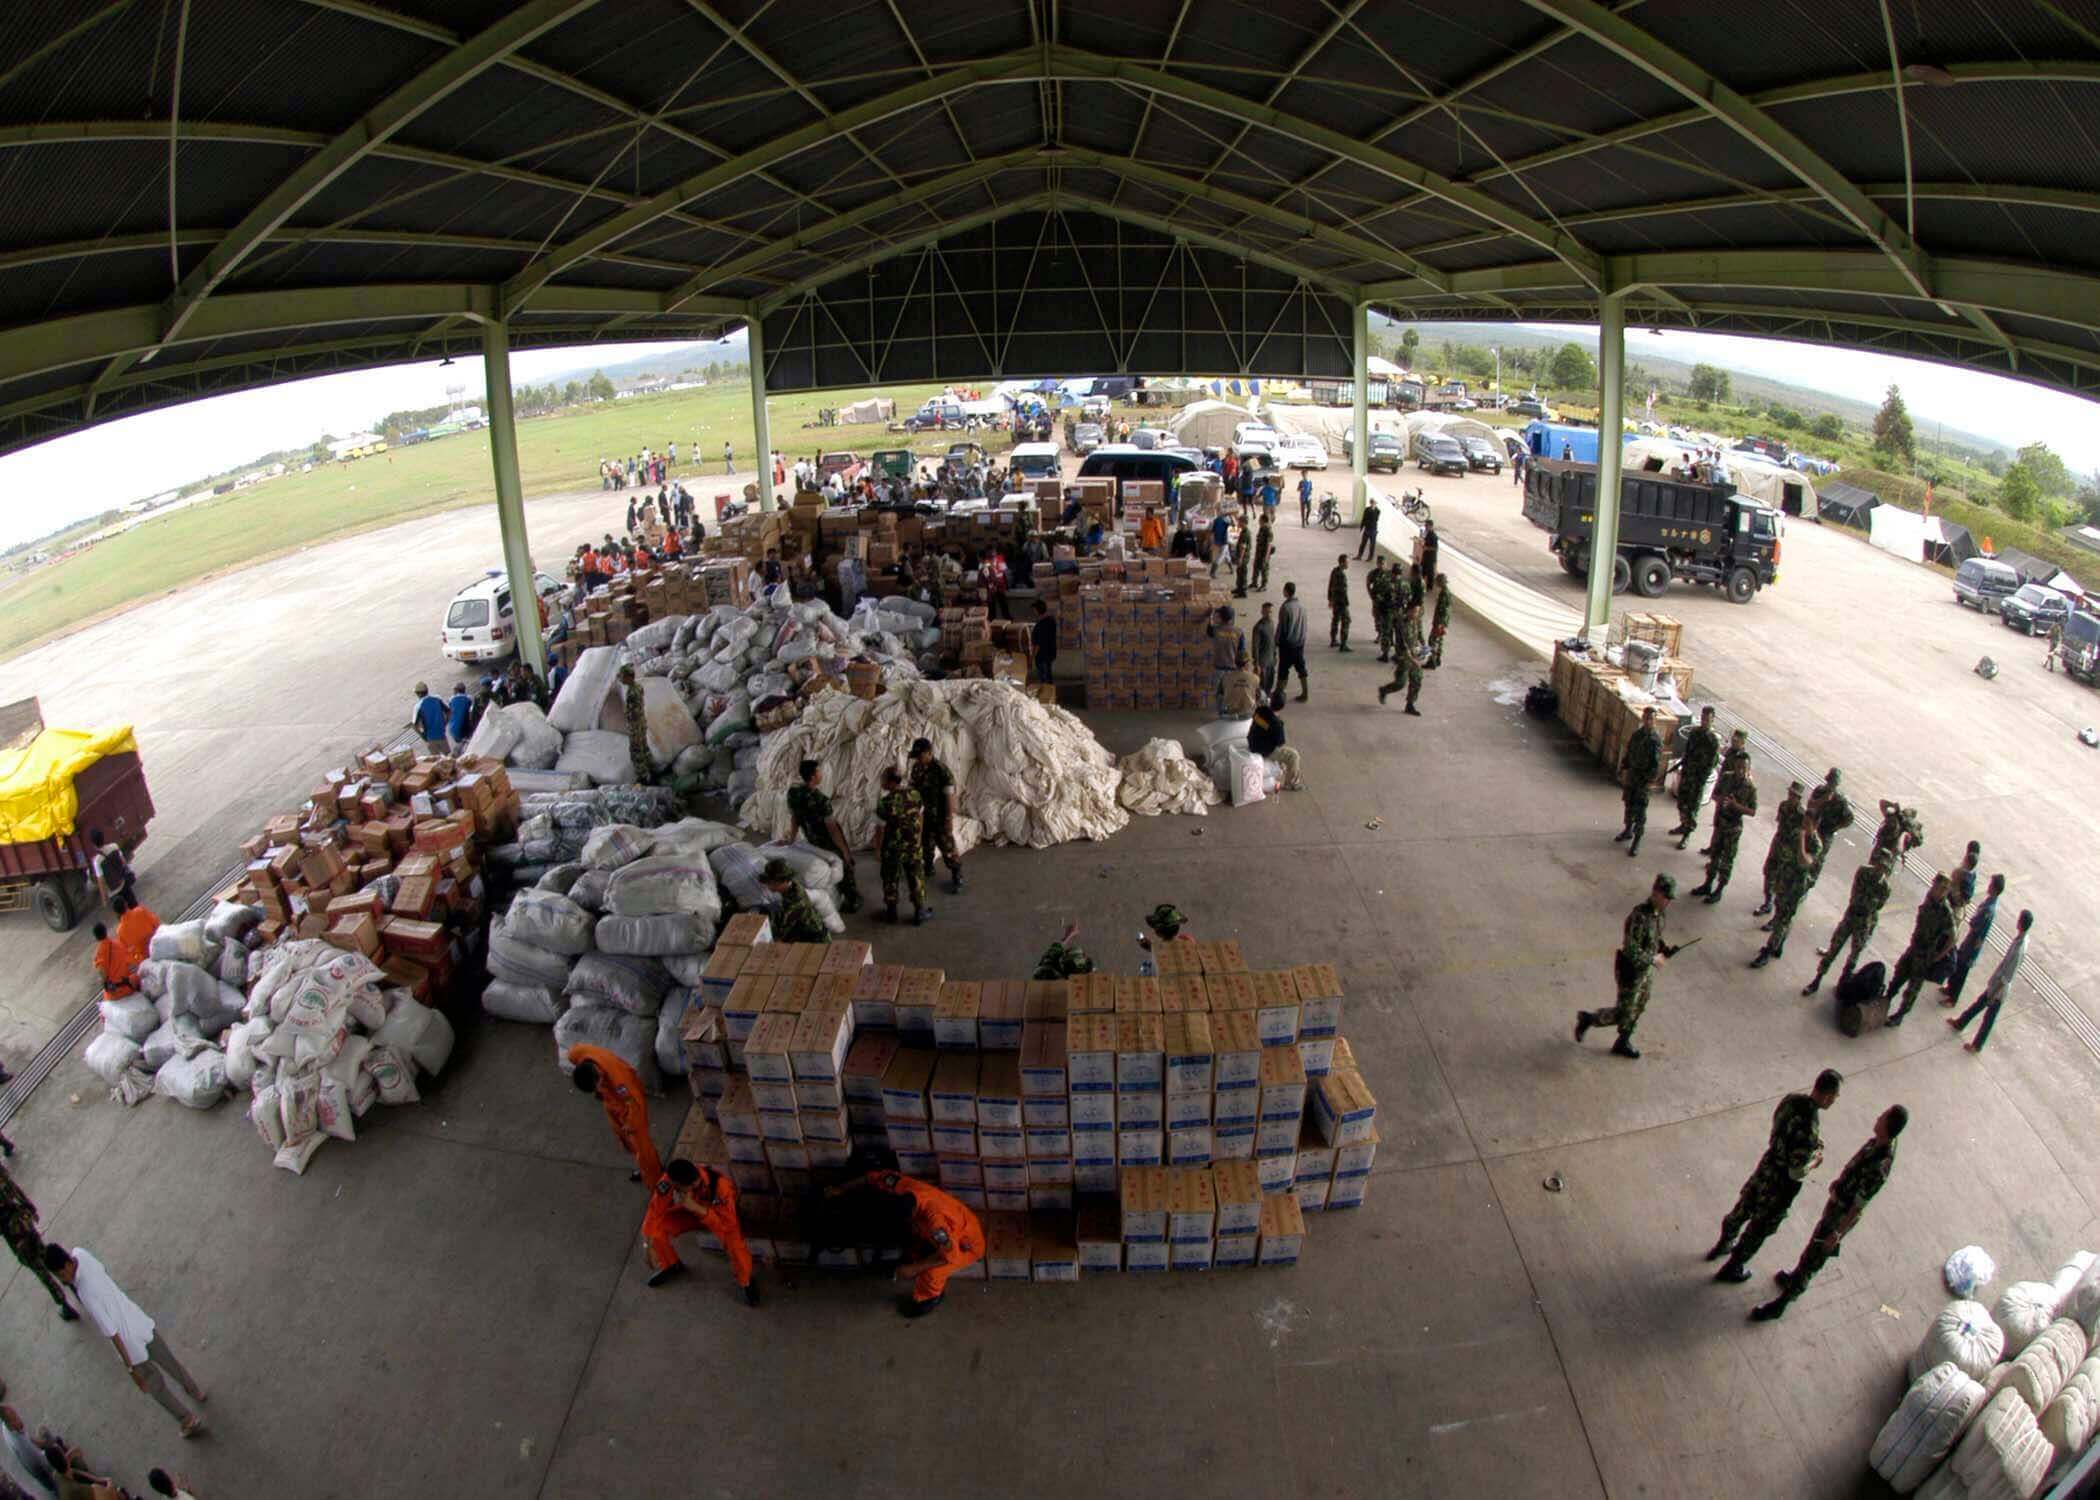 Supplies wait for collection after donations arrive from multiple countries